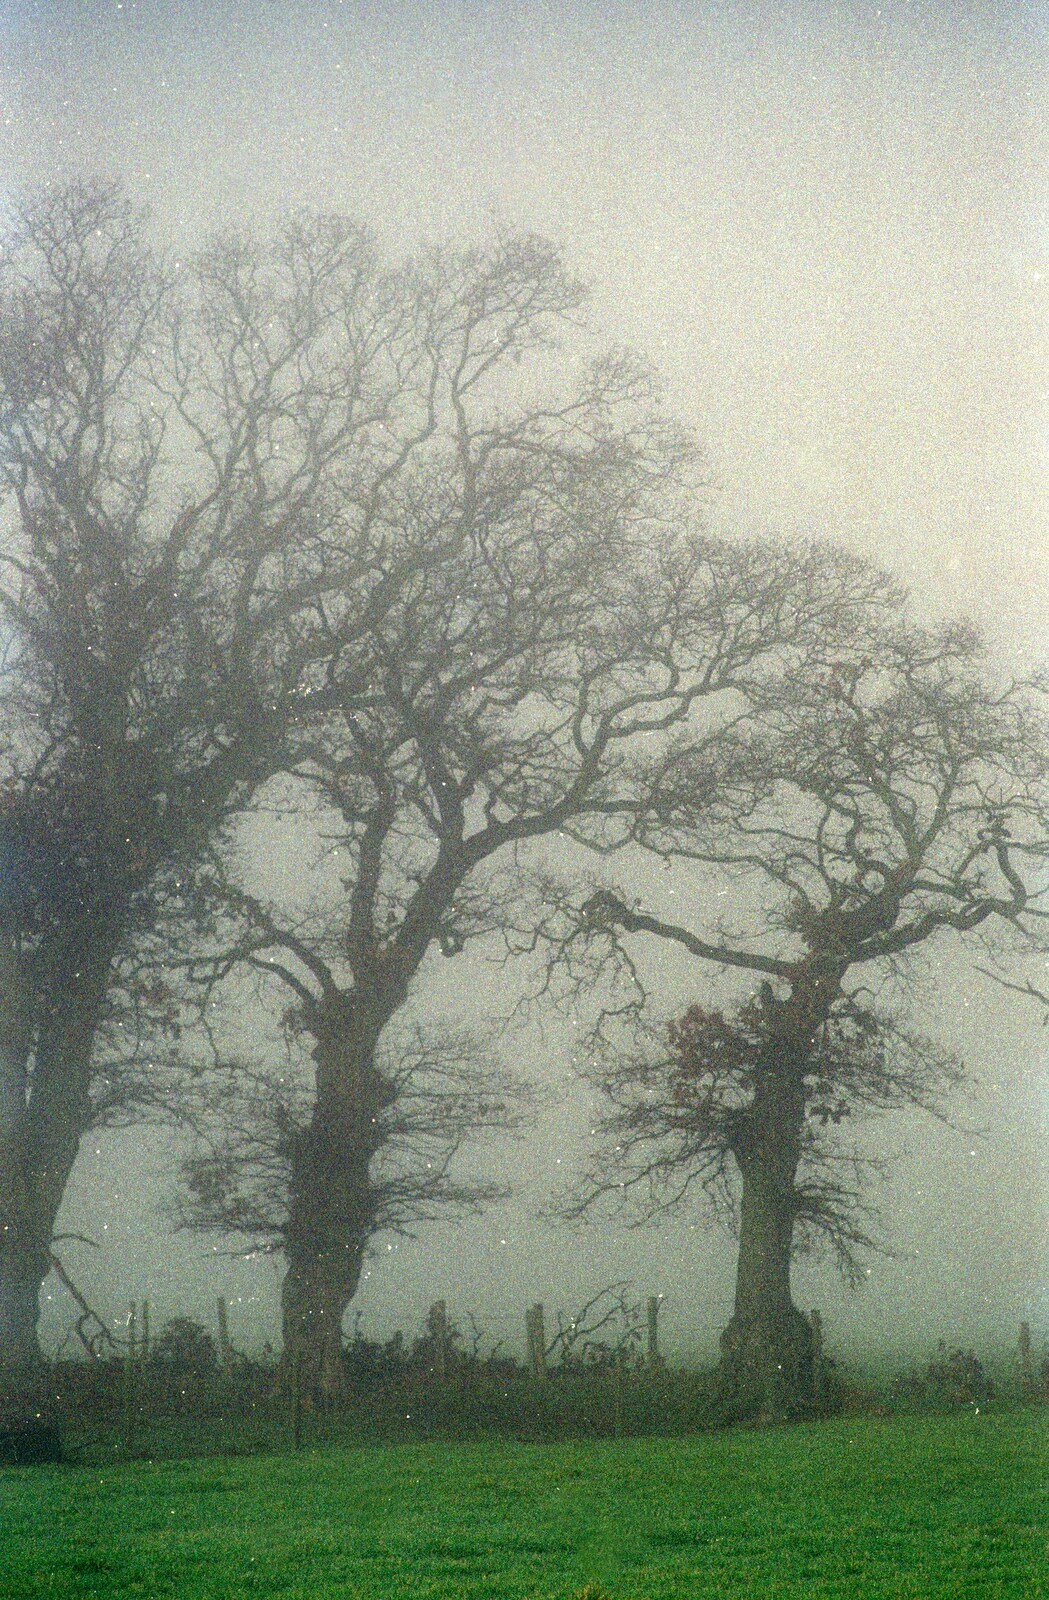 Misty trees from A Visit to Sheringham, North Norfolk - 20th November 1987